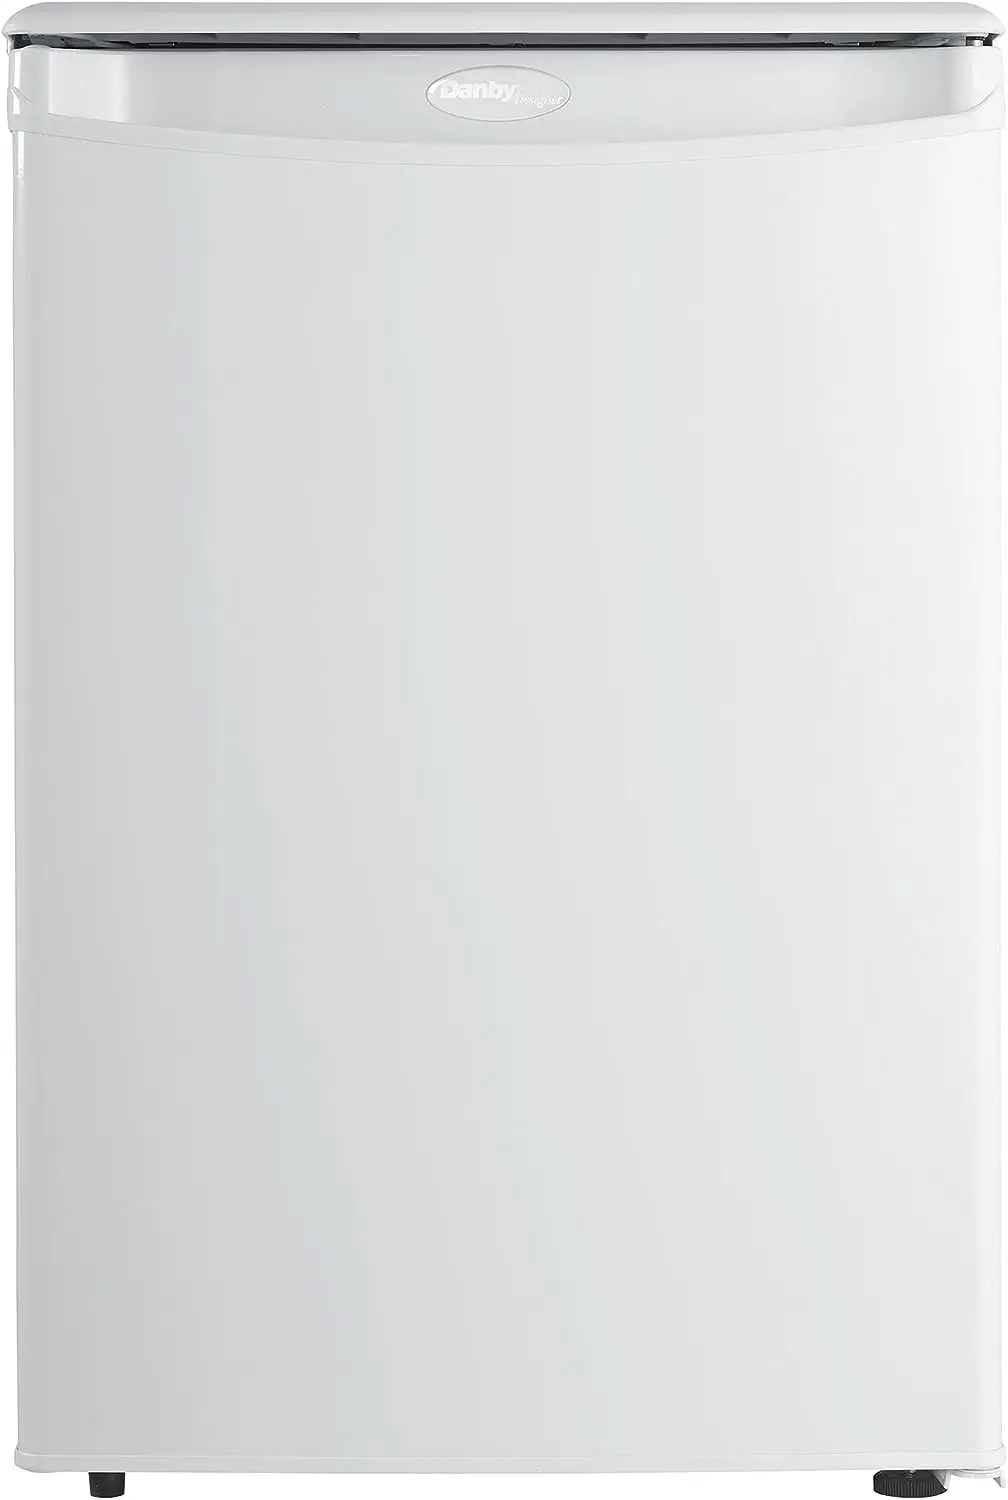 

DAR026A1WDD-6 2.6 Cu.Ft. Mini Fridge, Compact Refrigerator for Bedroom, Office, , countertop, E-Star Rated in White